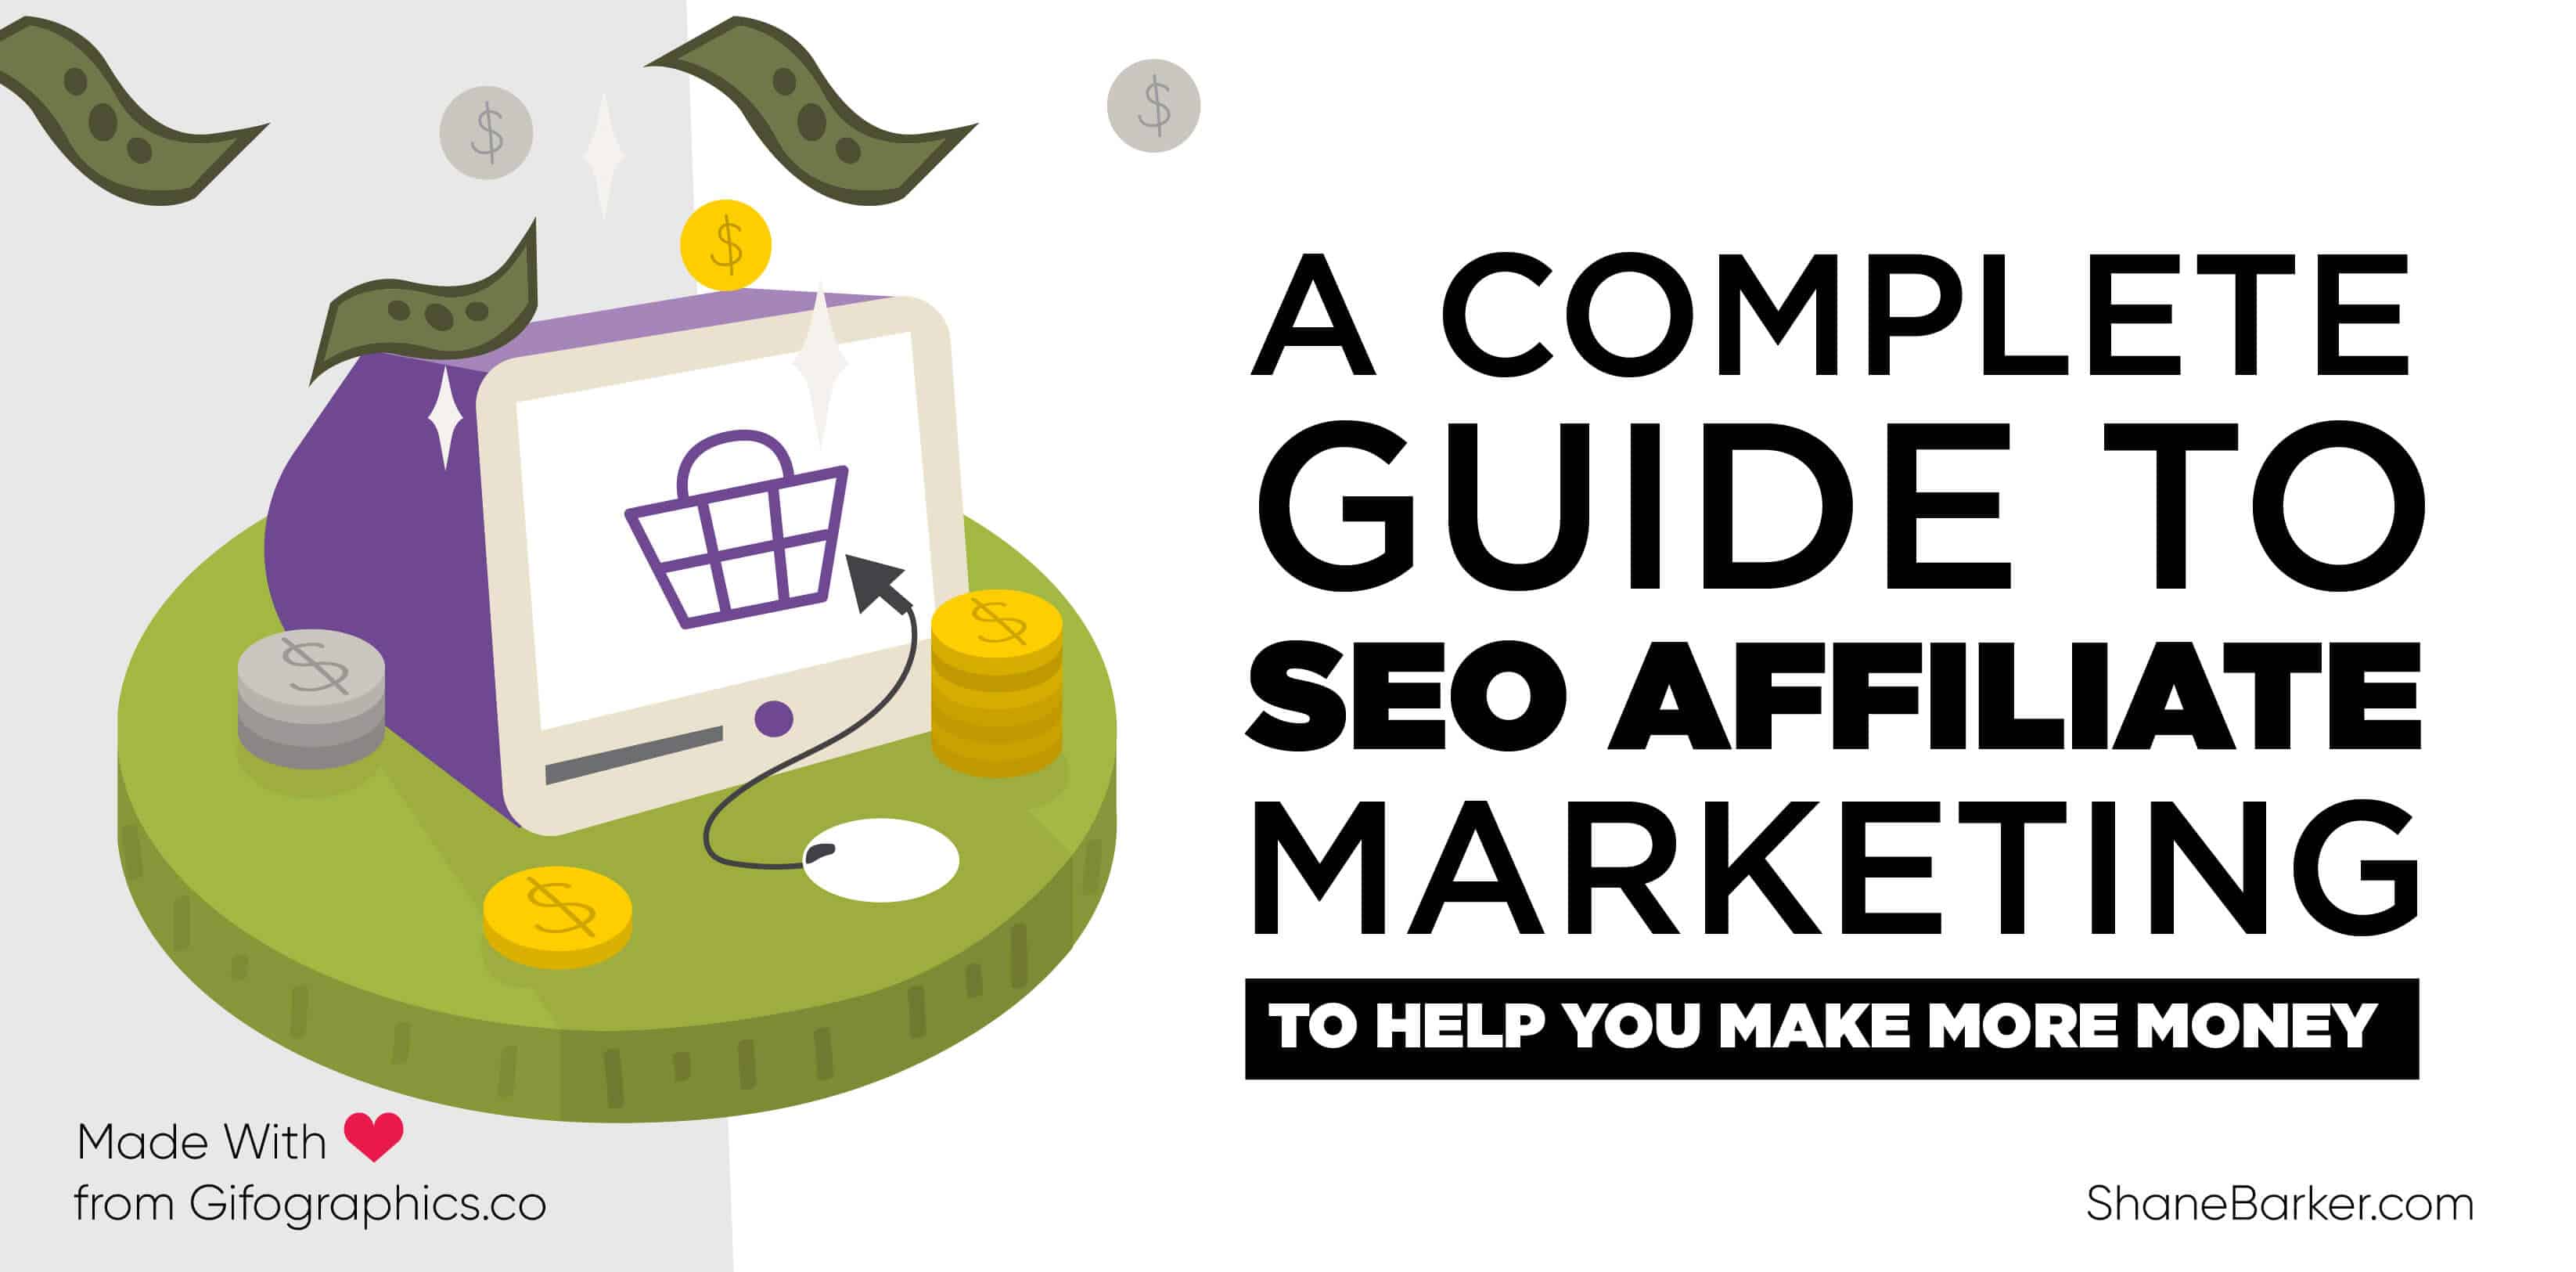 A Complete Guide to SEO Affiliate Marketing to Help You Make More Money